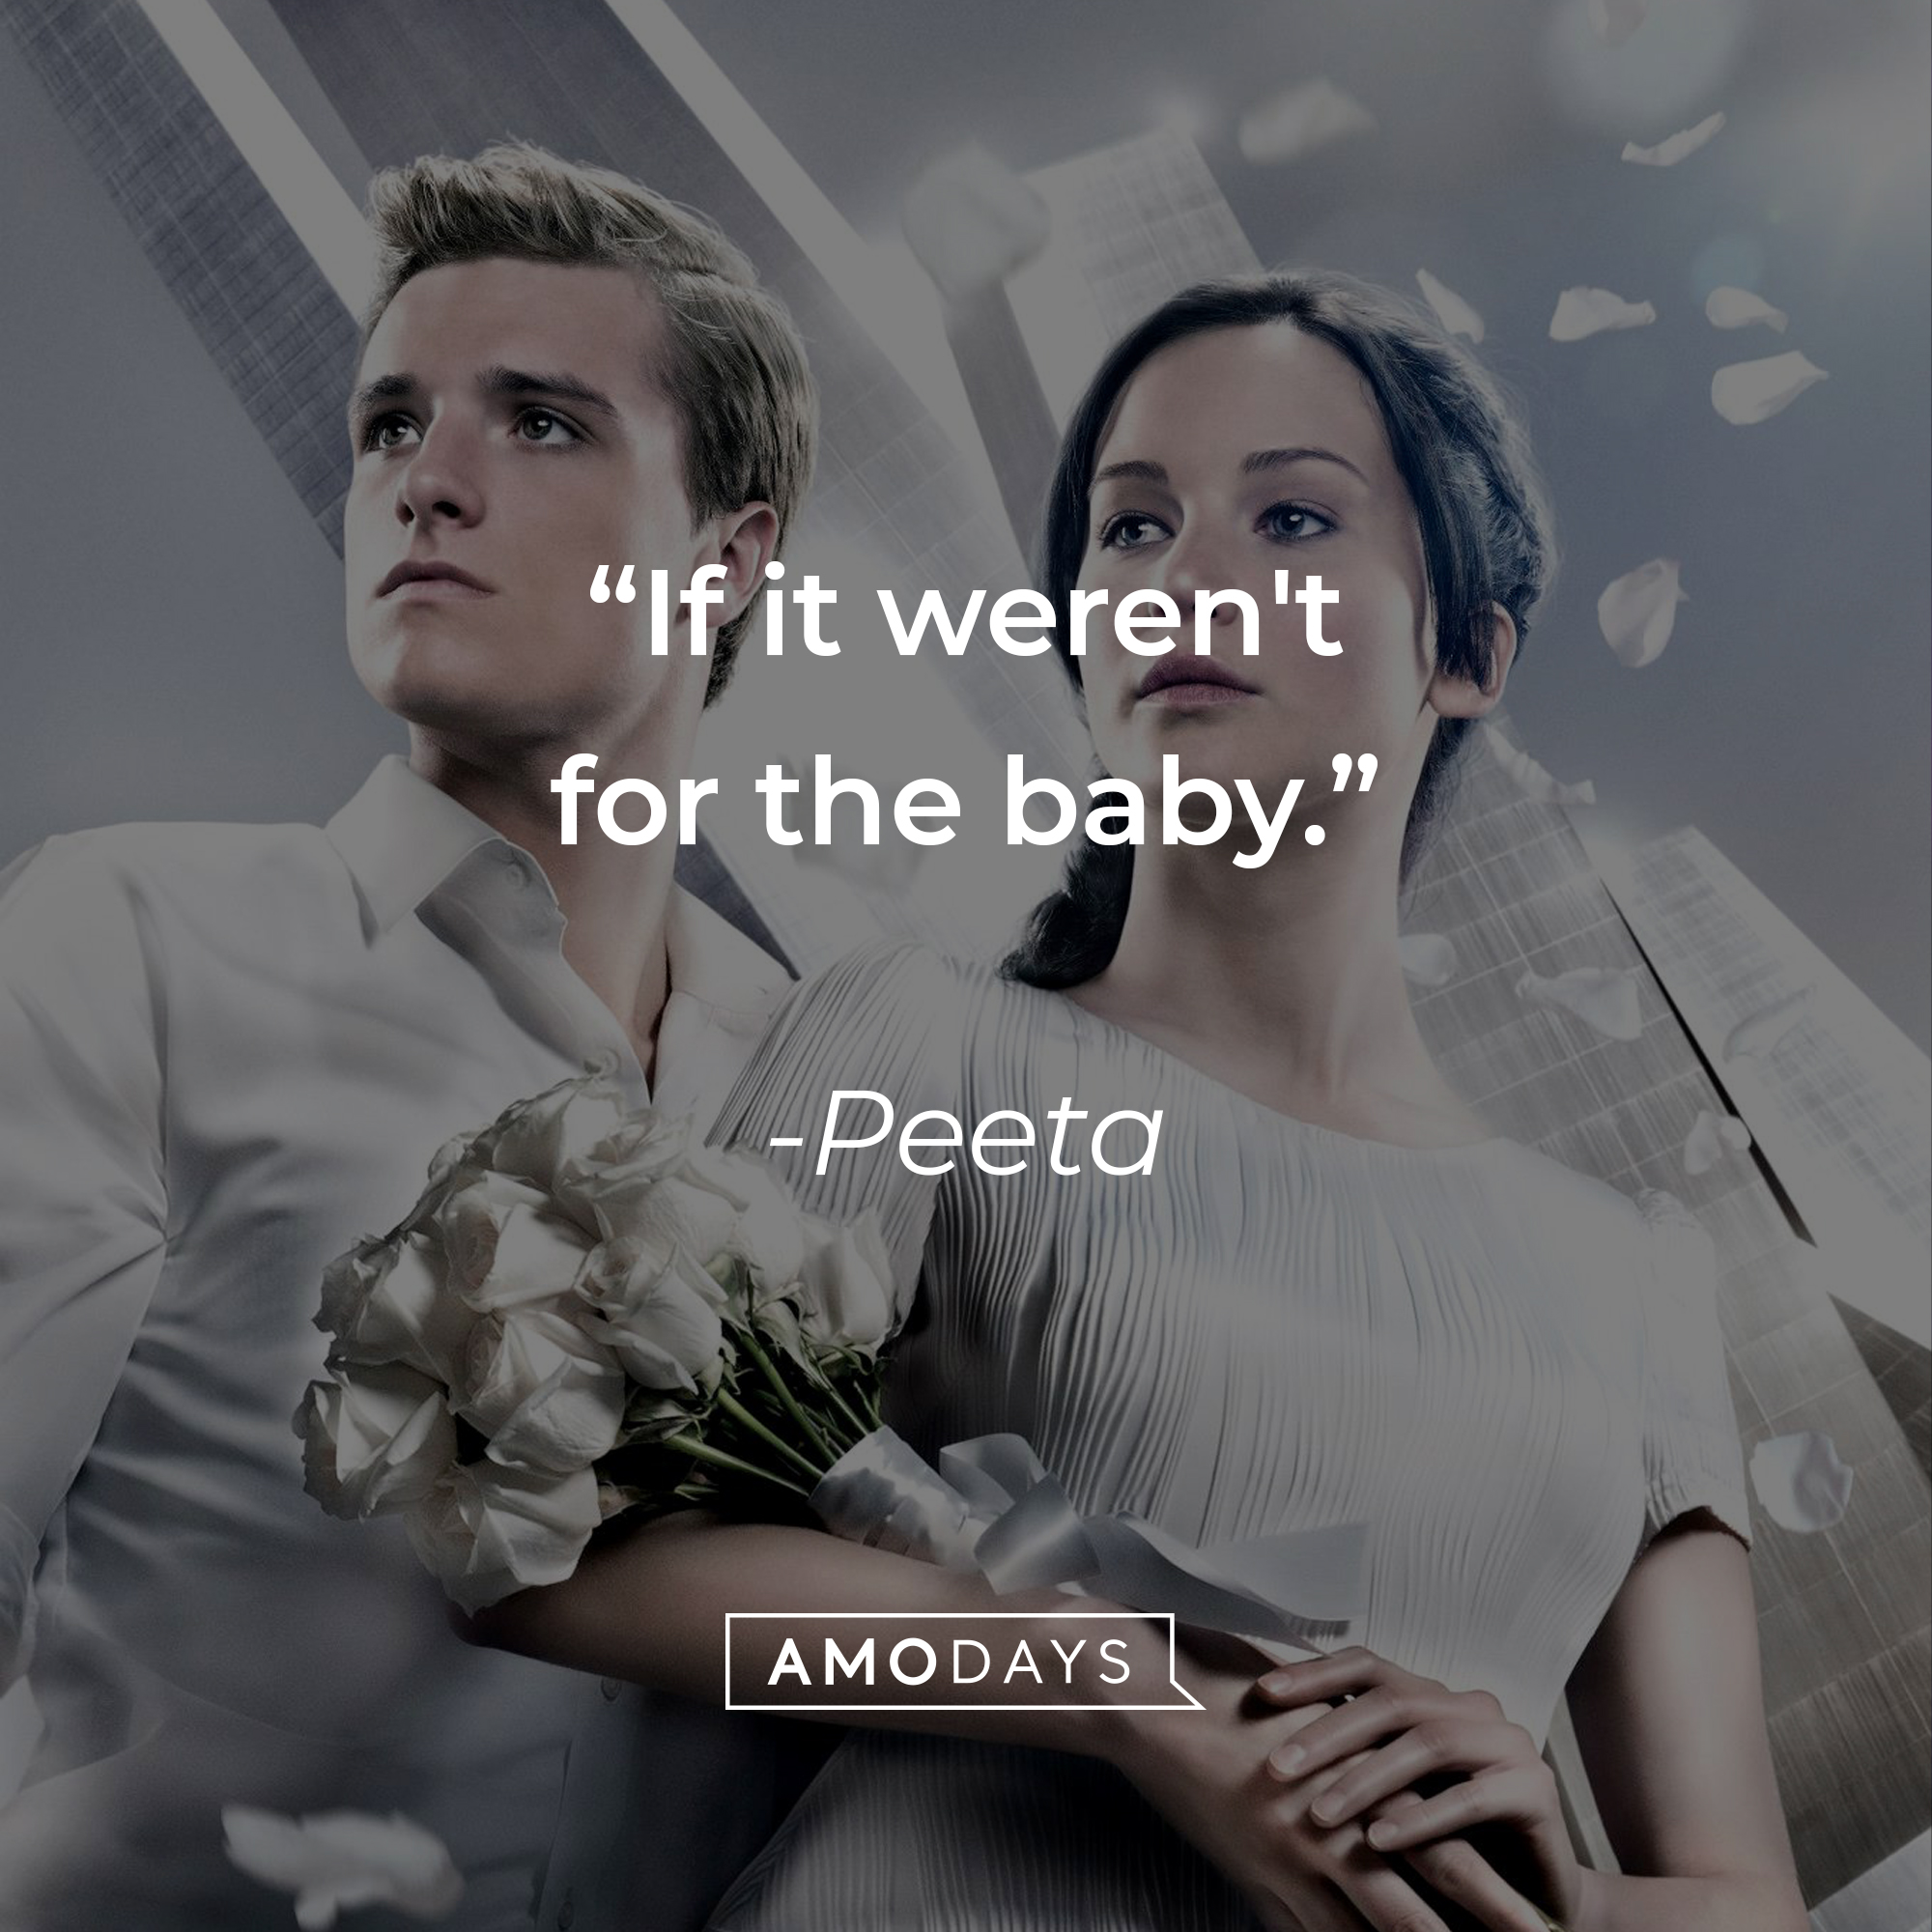 Peeta's quote: "If it weren't for the baby." | Source: facebook.com/TheHungerGamesMovie